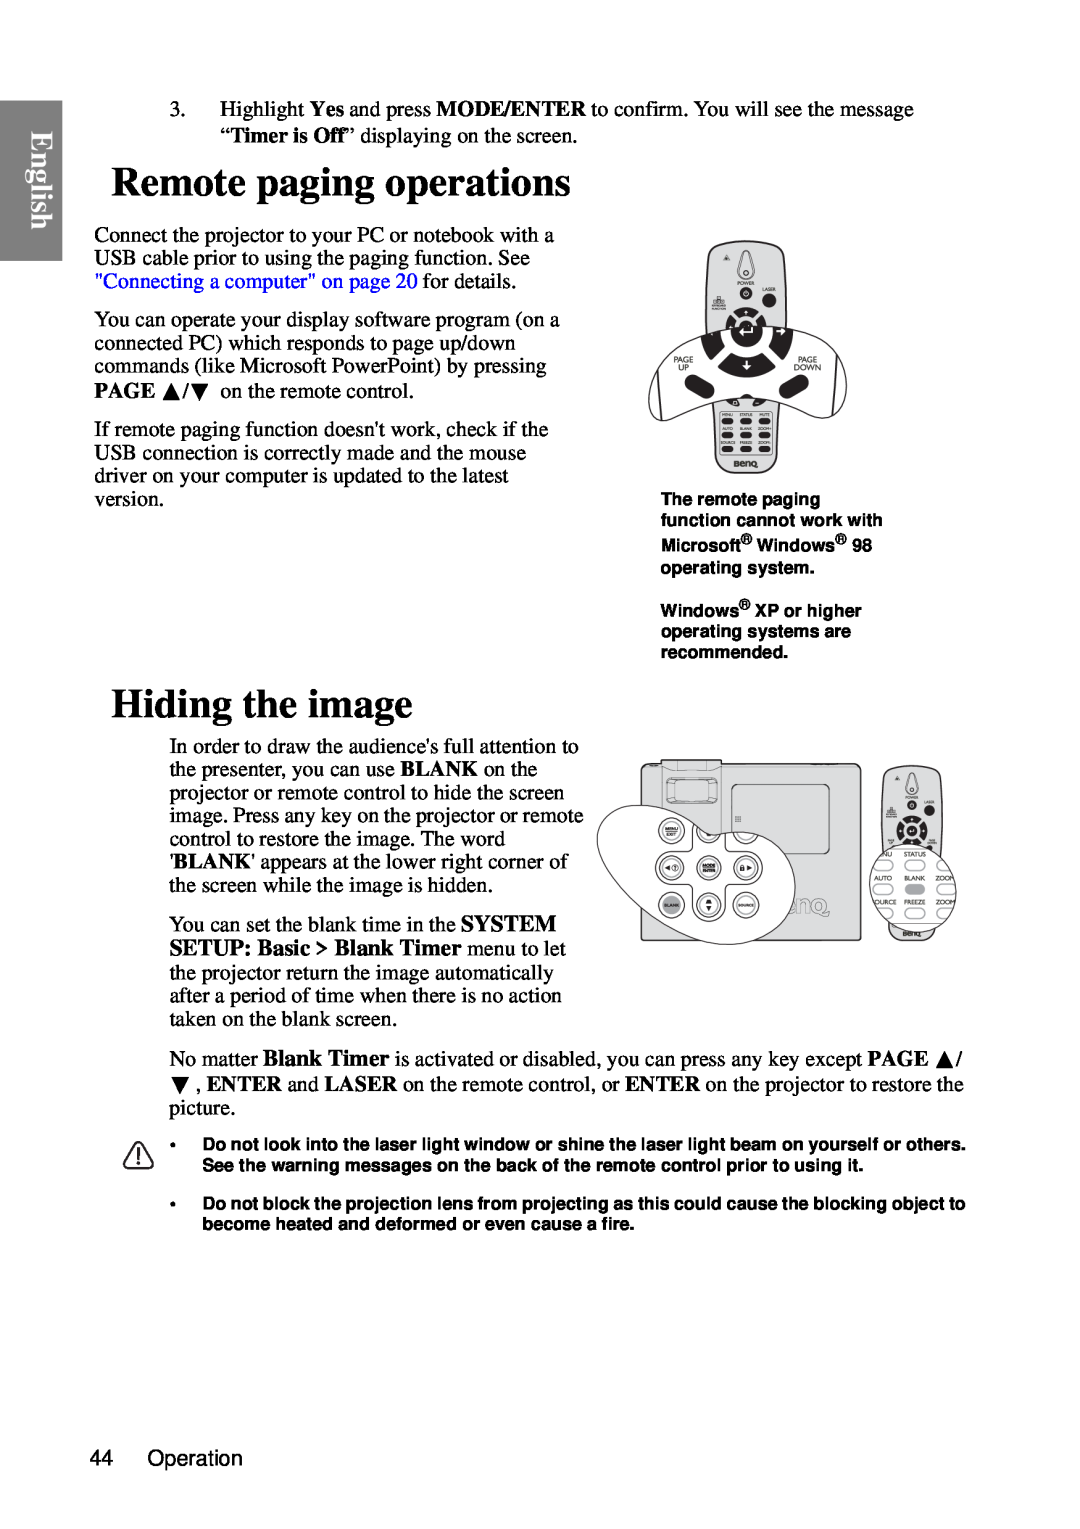 BenQ MP735, MP727 user manual Remote paging operations, Hiding the image, English, version 